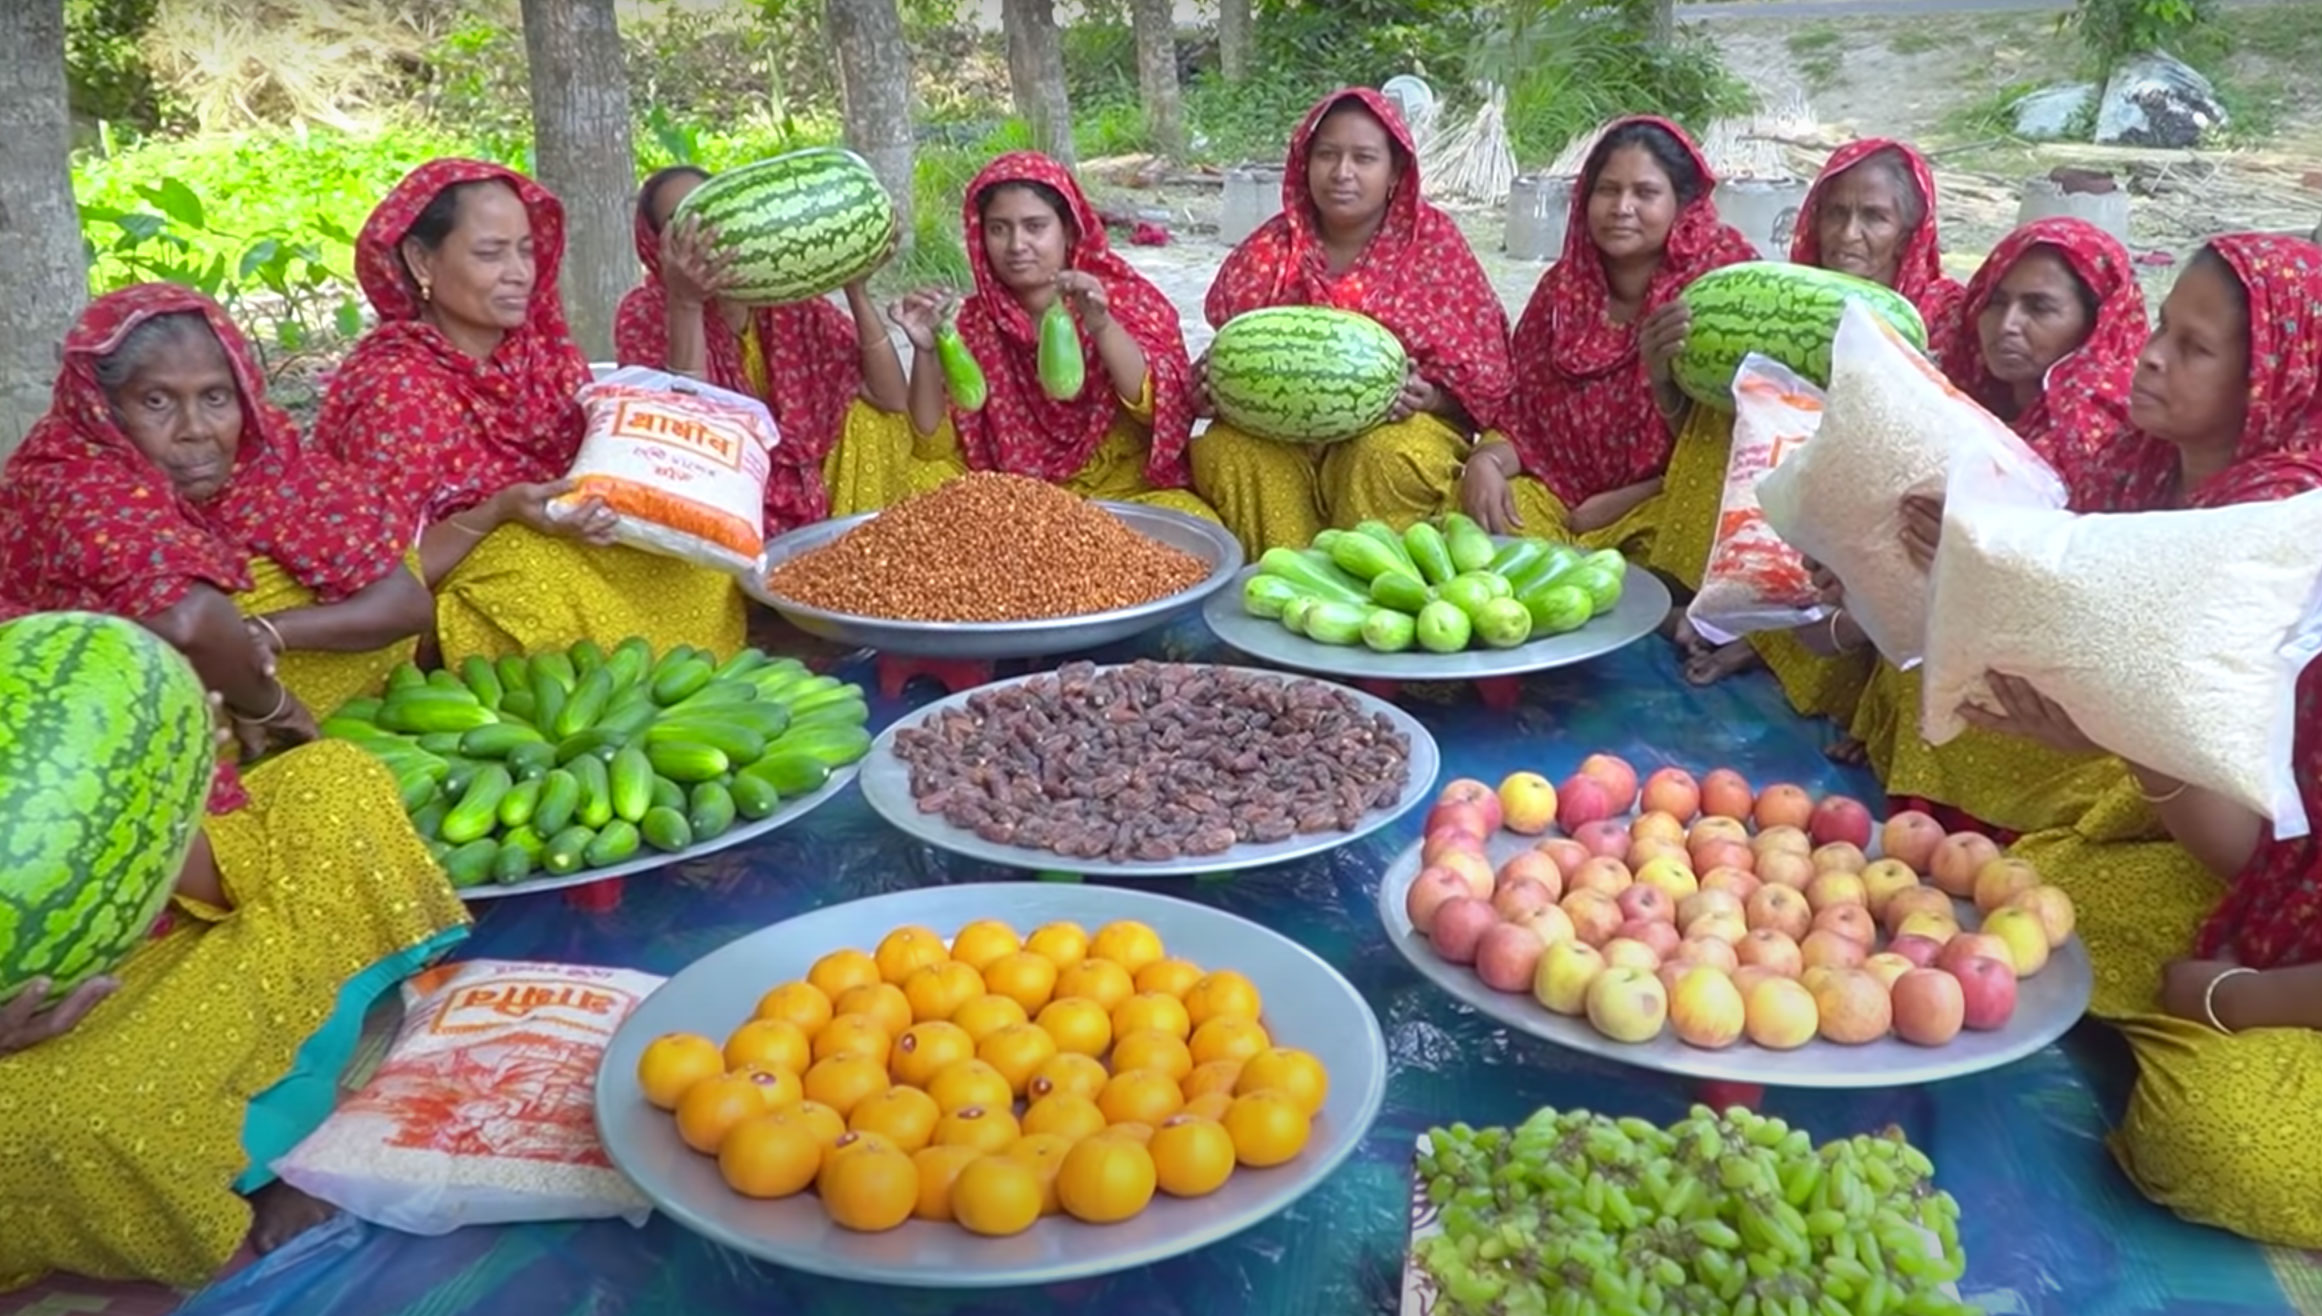 On Youtube, villagers in Bangladesh share their daily lives with millions of subscribers